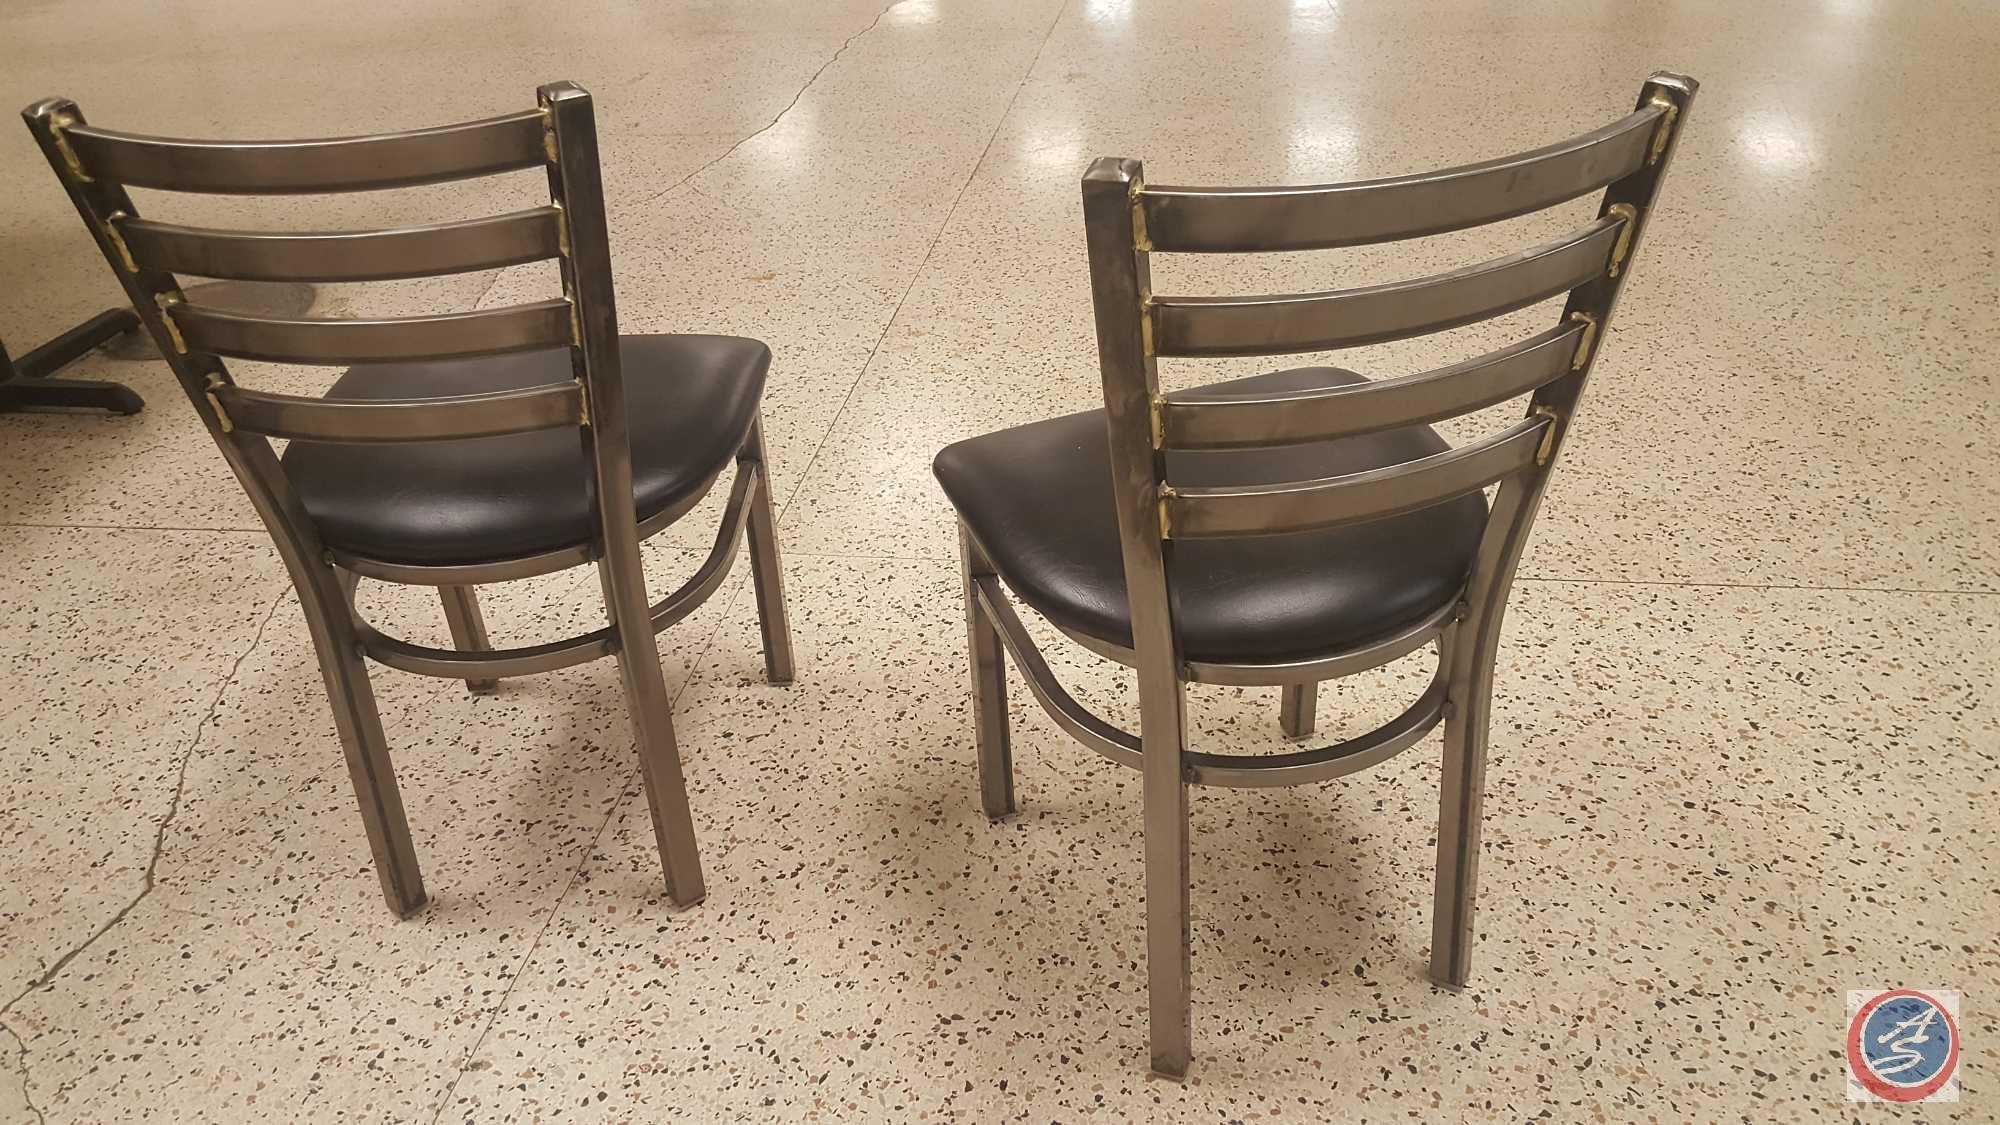 {{8X$BID}} (8) Welded Metal Frame Ladder Back Restaurant Chairs w/ Padded Seats {SOLD 8x THE MONEY}